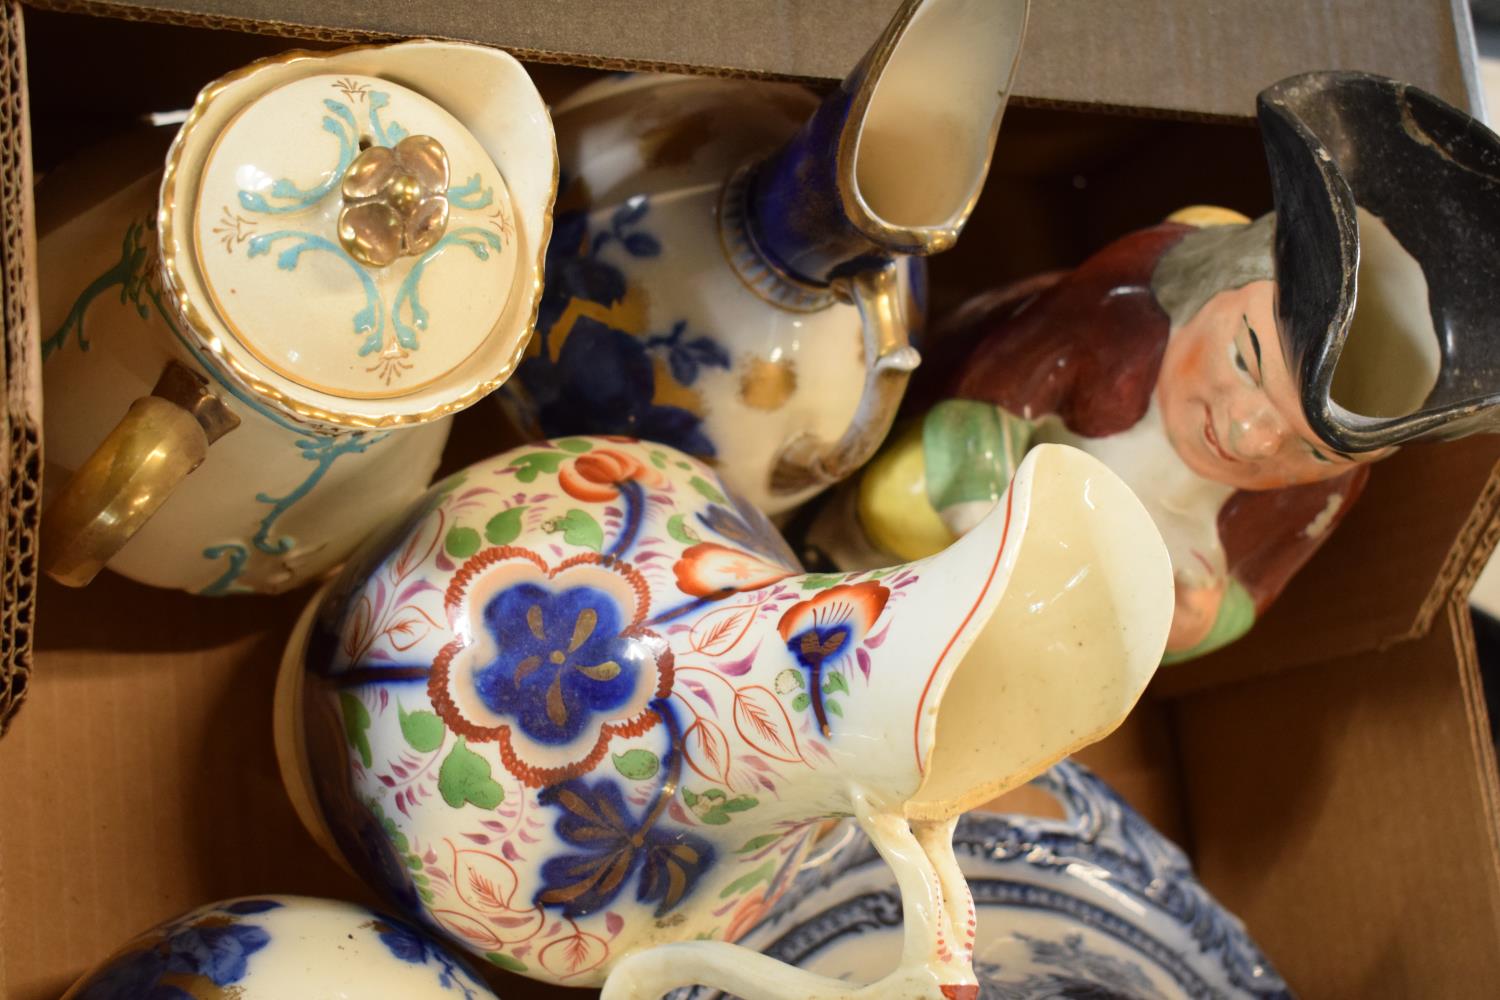 A collection of 19th century Staffordshire pottery to include Mayers jugs, Toby jugs, Moultan tureen - Image 2 of 4